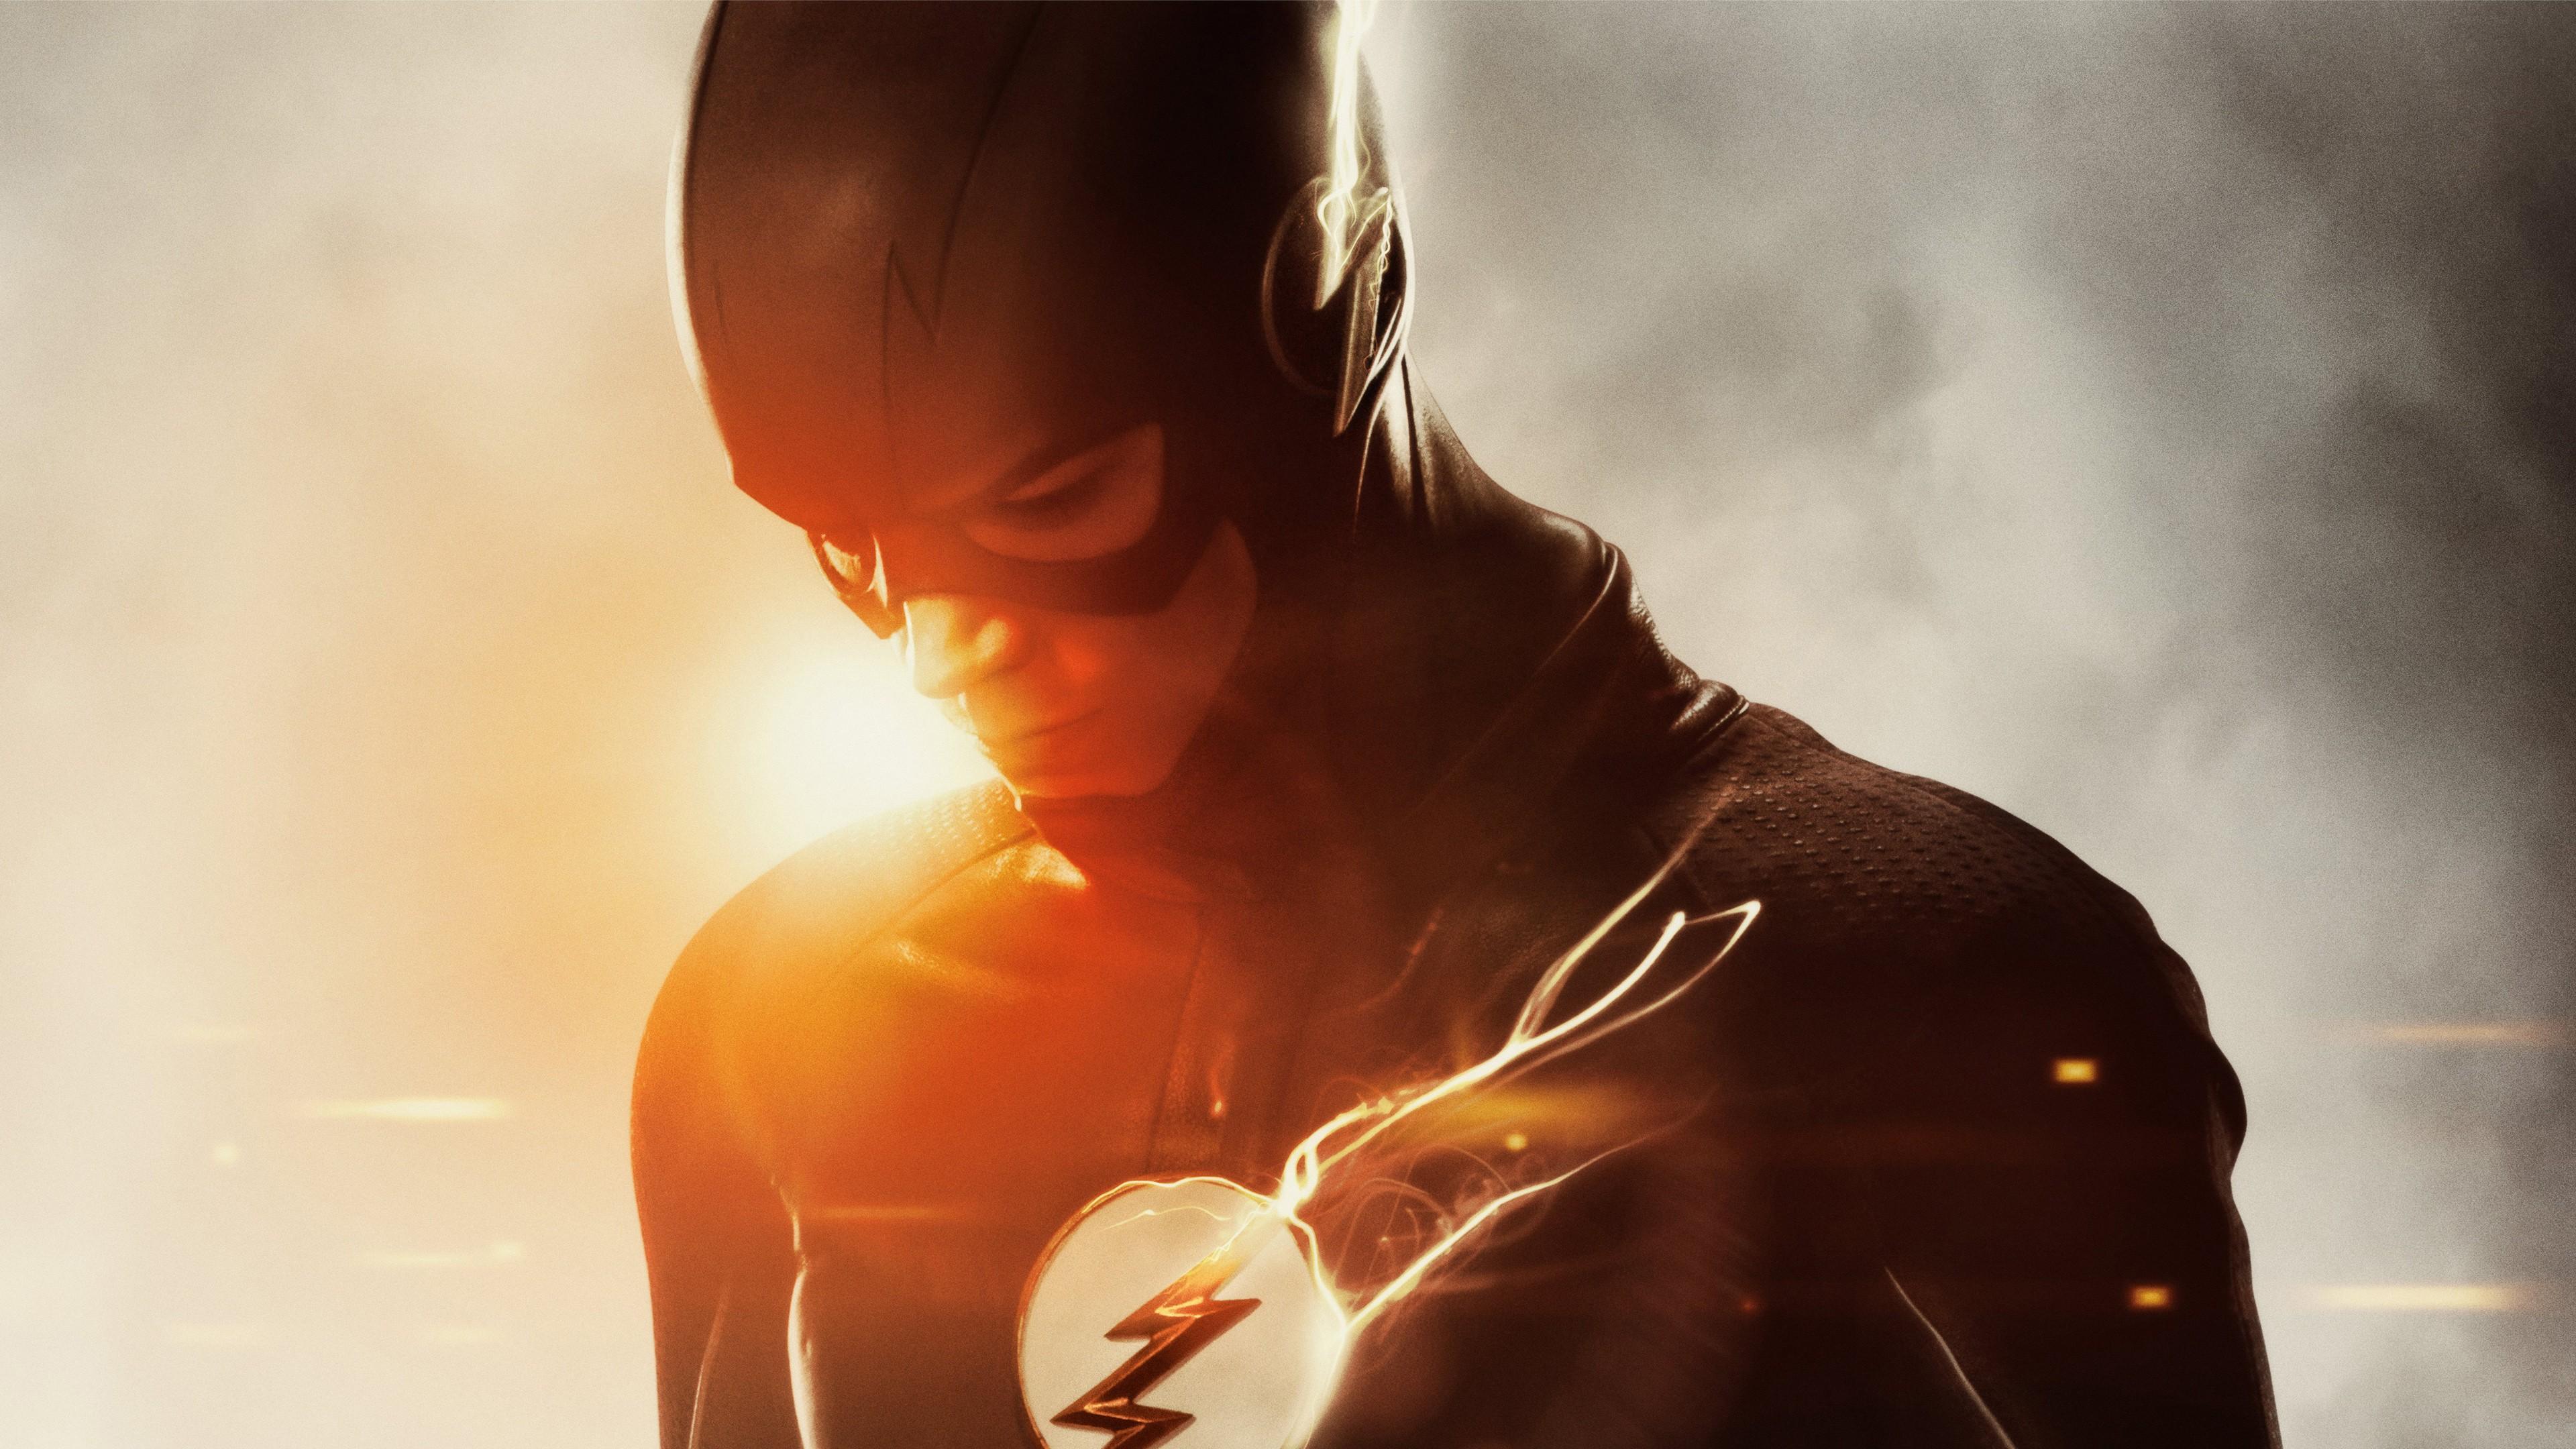 3840 x 2160 · jpeg - The Flash Season 2 HD Wallpapers For Android - Download hd wallpapers